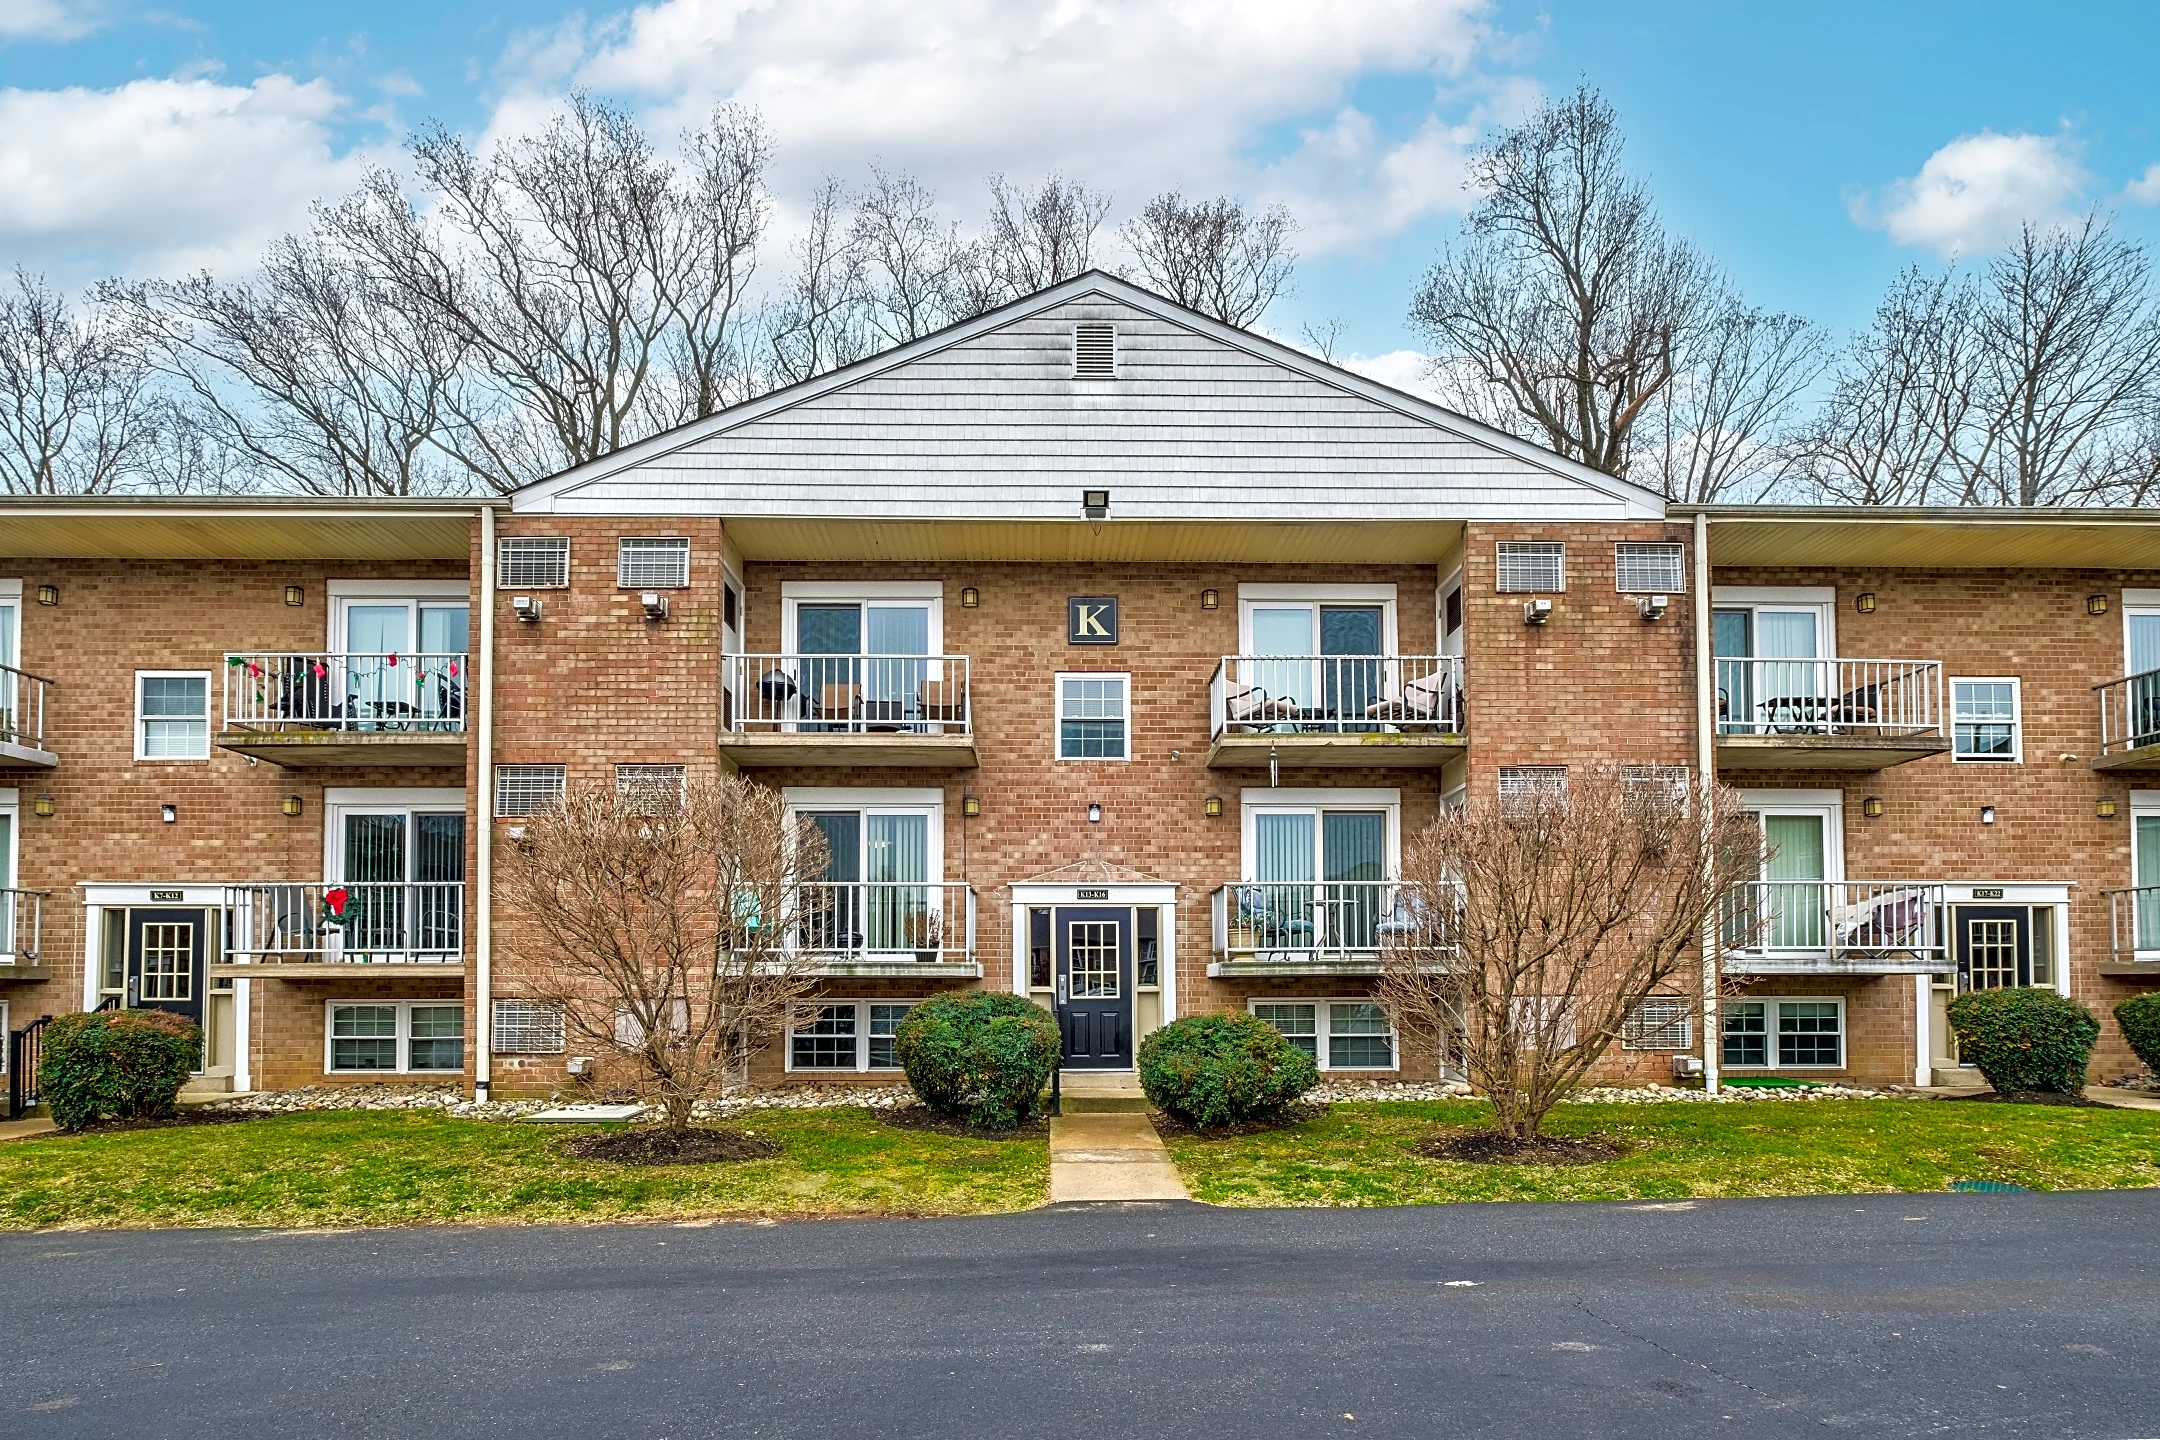 Building - Stone Hill Apartments - Brookhaven, PA